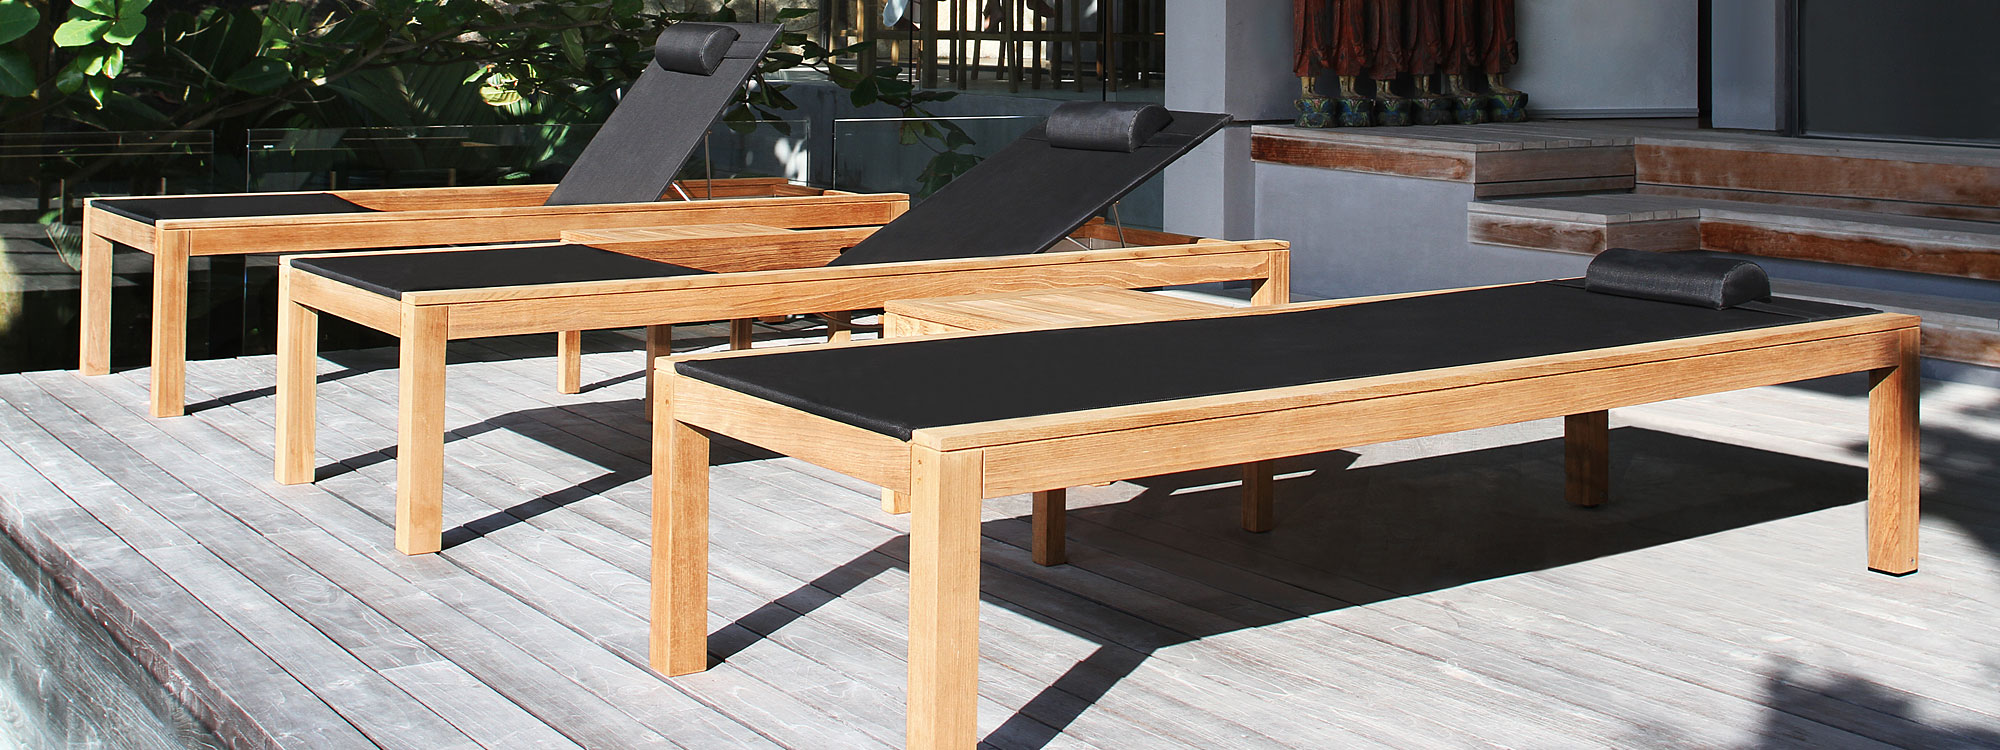 Image of row of three XQI sun loungers on decking by Royal Botania